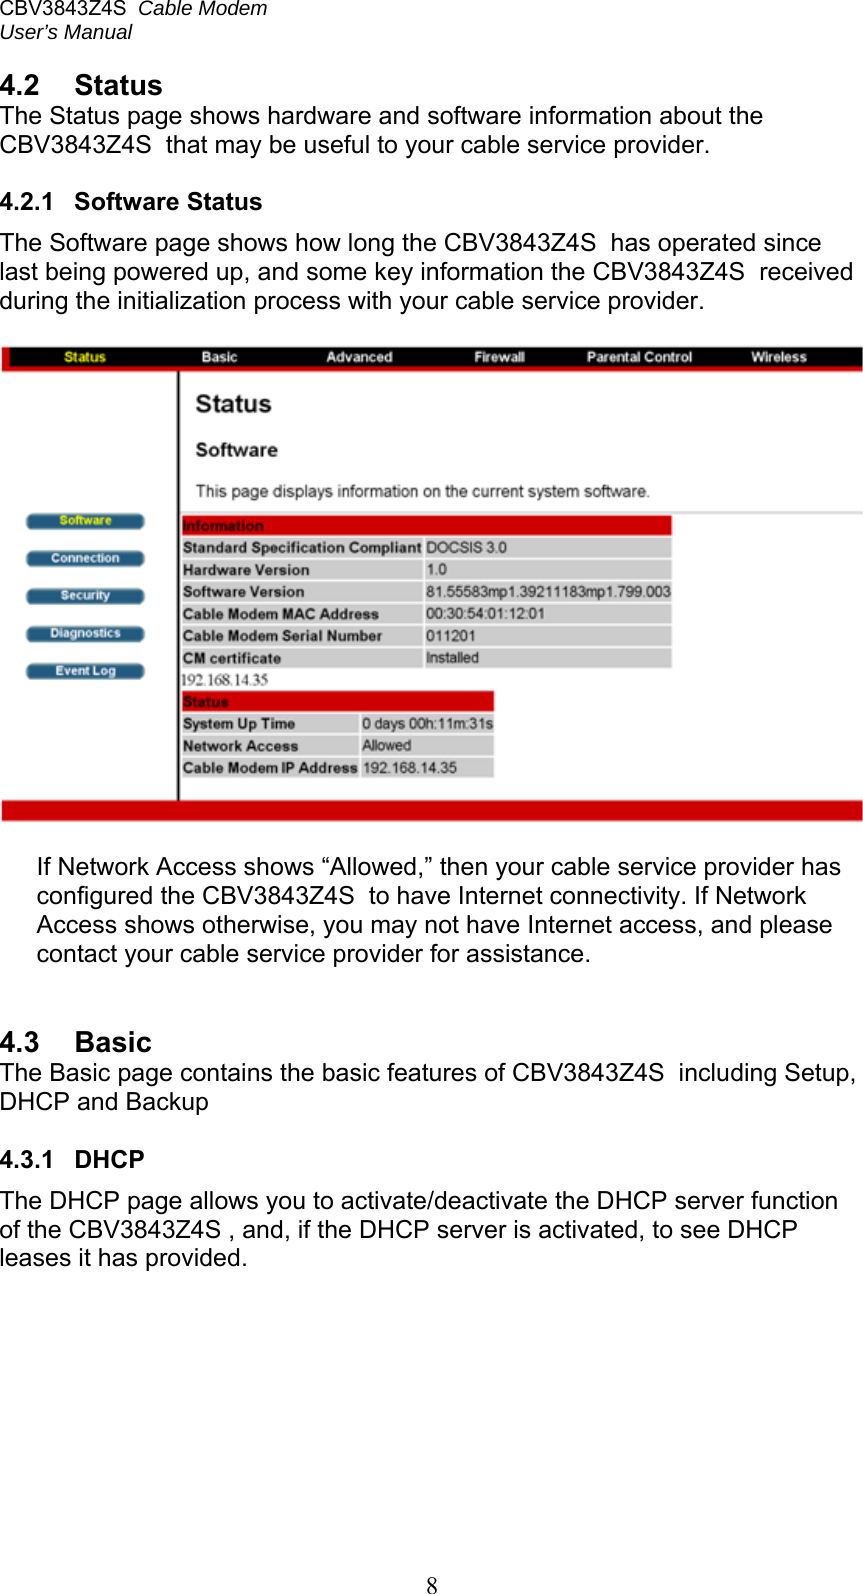 CBV3843Z4S  Cable Modem  User’s Manual   8 4.2  Status The Status page shows hardware and software information about the CBV3843Z4S  that may be useful to your cable service provider.  4.2.1  Software Status The Software page shows how long the CBV3843Z4S  has operated since last being powered up, and some key information the CBV3843Z4S  received during the initialization process with your cable service provider.    If Network Access shows “Allowed,” then your cable service provider has configured the CBV3843Z4S  to have Internet connectivity. If Network Access shows otherwise, you may not have Internet access, and please contact your cable service provider for assistance.   4.3  Basic The Basic page contains the basic features of CBV3843Z4S  including Setup, DHCP and Backup  4.3.1  DHCP The DHCP page allows you to activate/deactivate the DHCP server function of the CBV3843Z4S , and, if the DHCP server is activated, to see DHCP leases it has provided. 